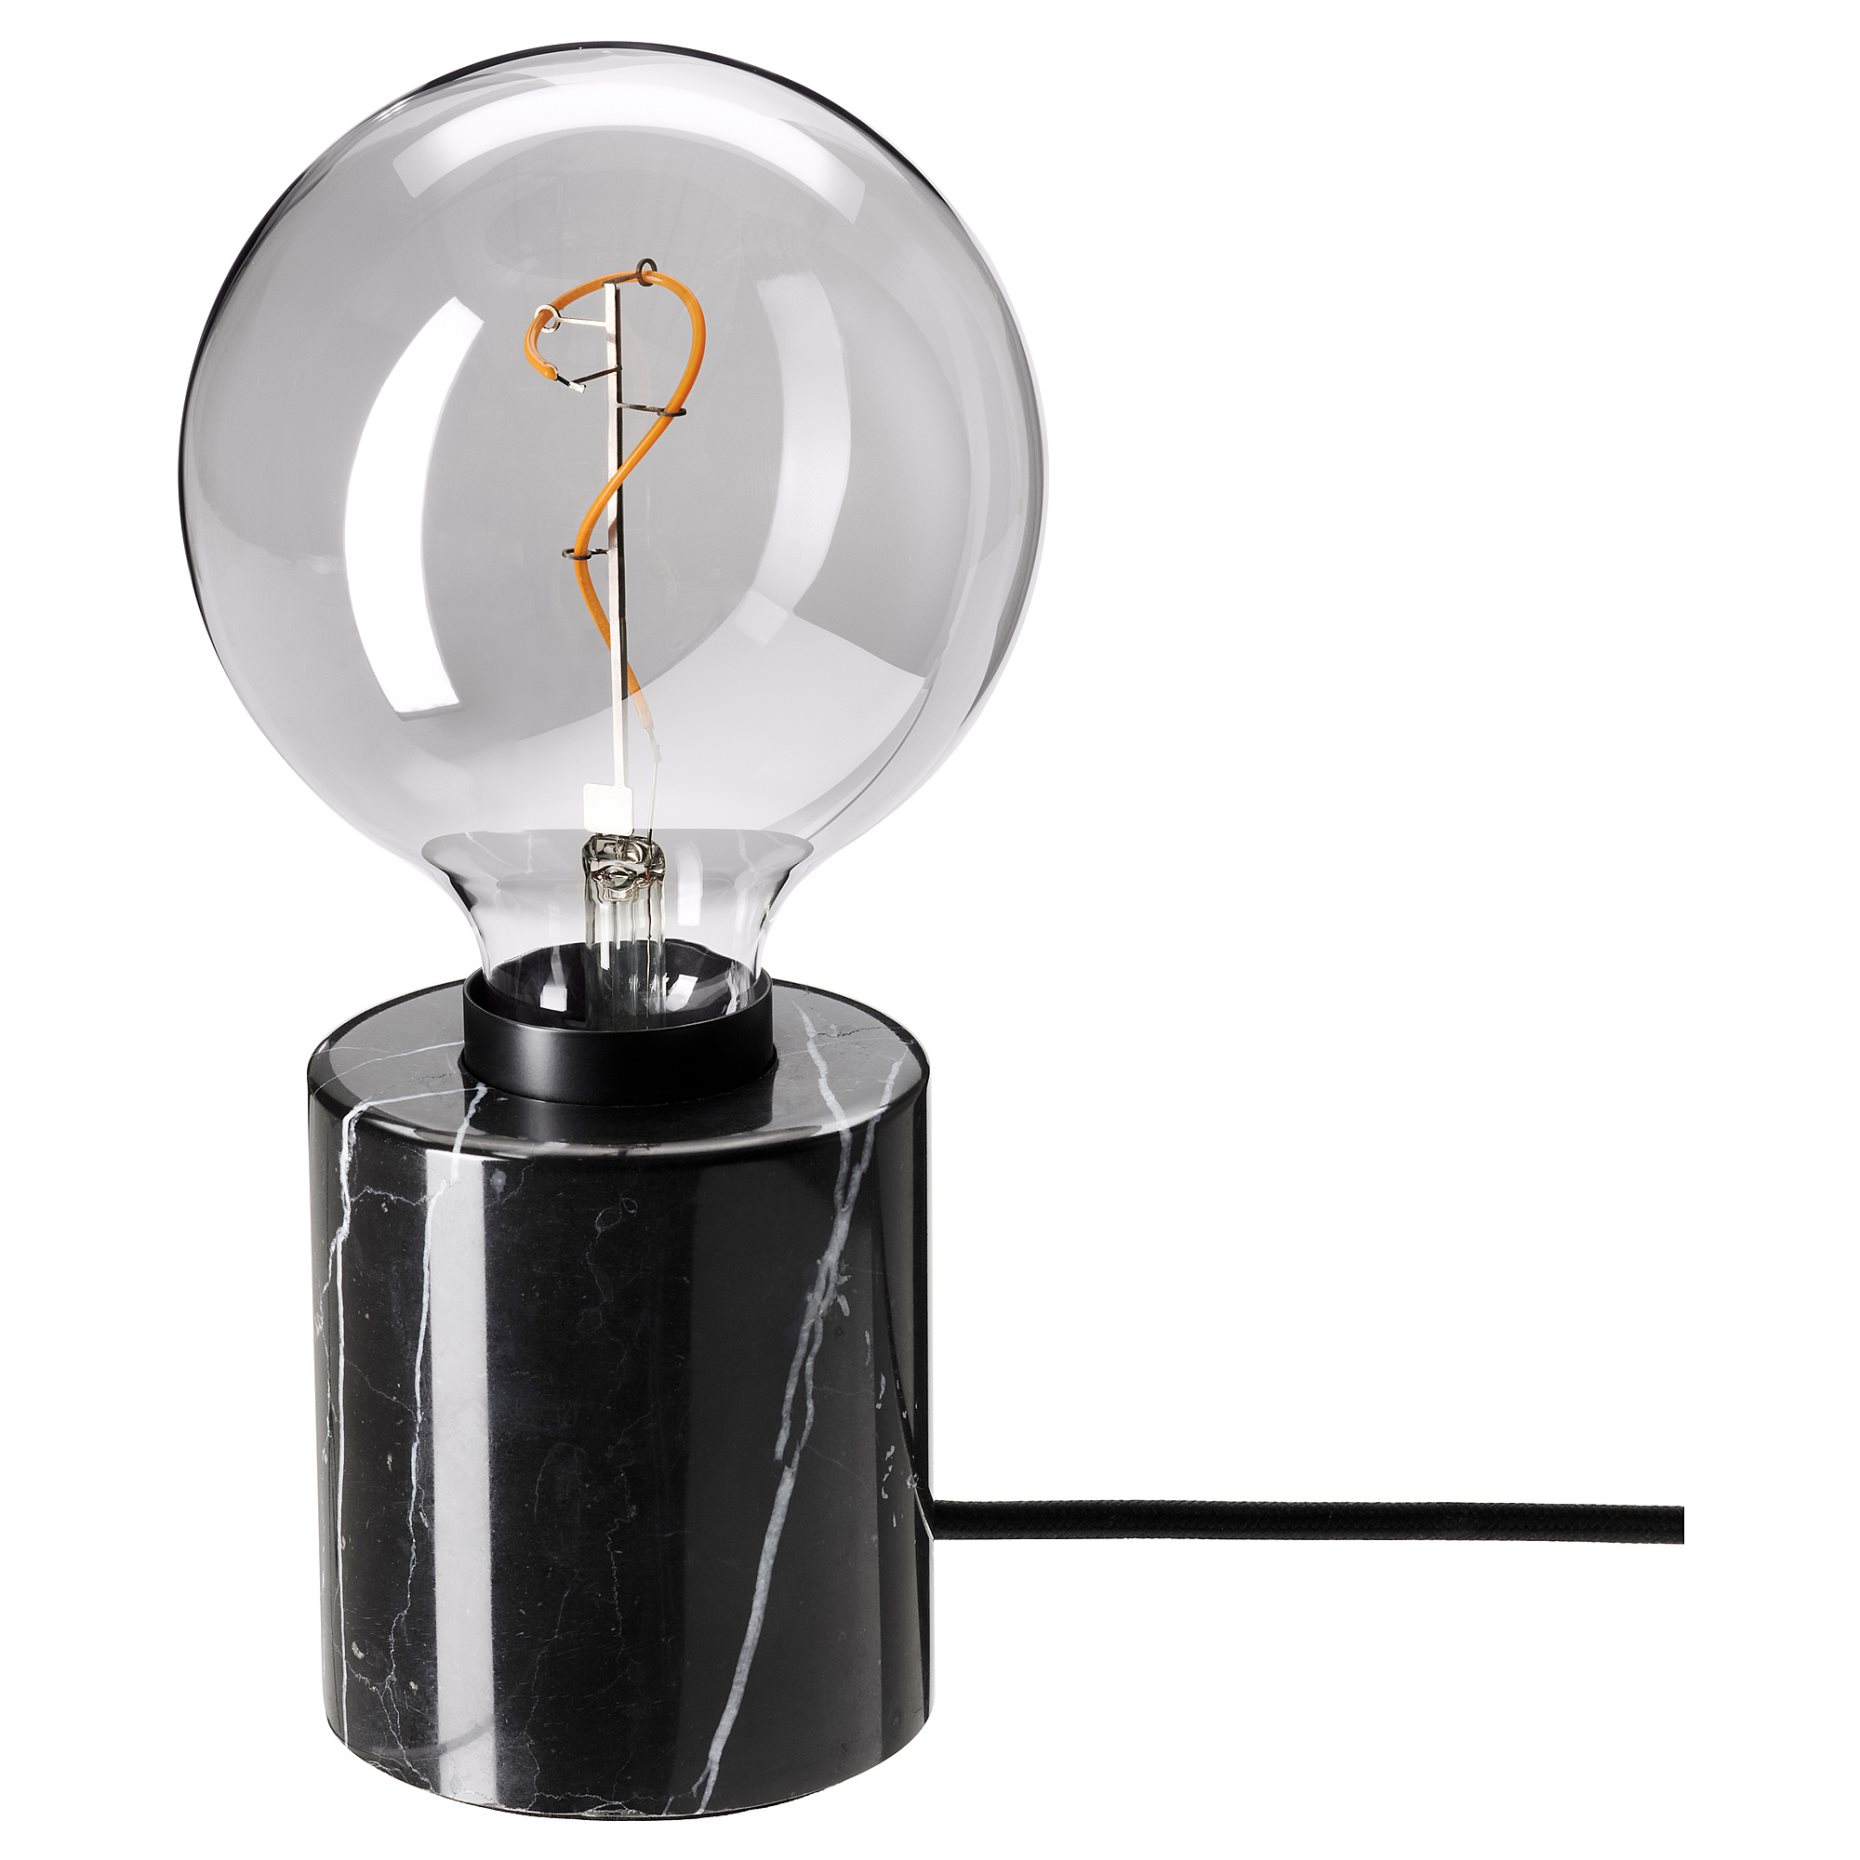 MARKFROST/MOLNART, table lamp with light bulb, 125 mm, 594.818.94